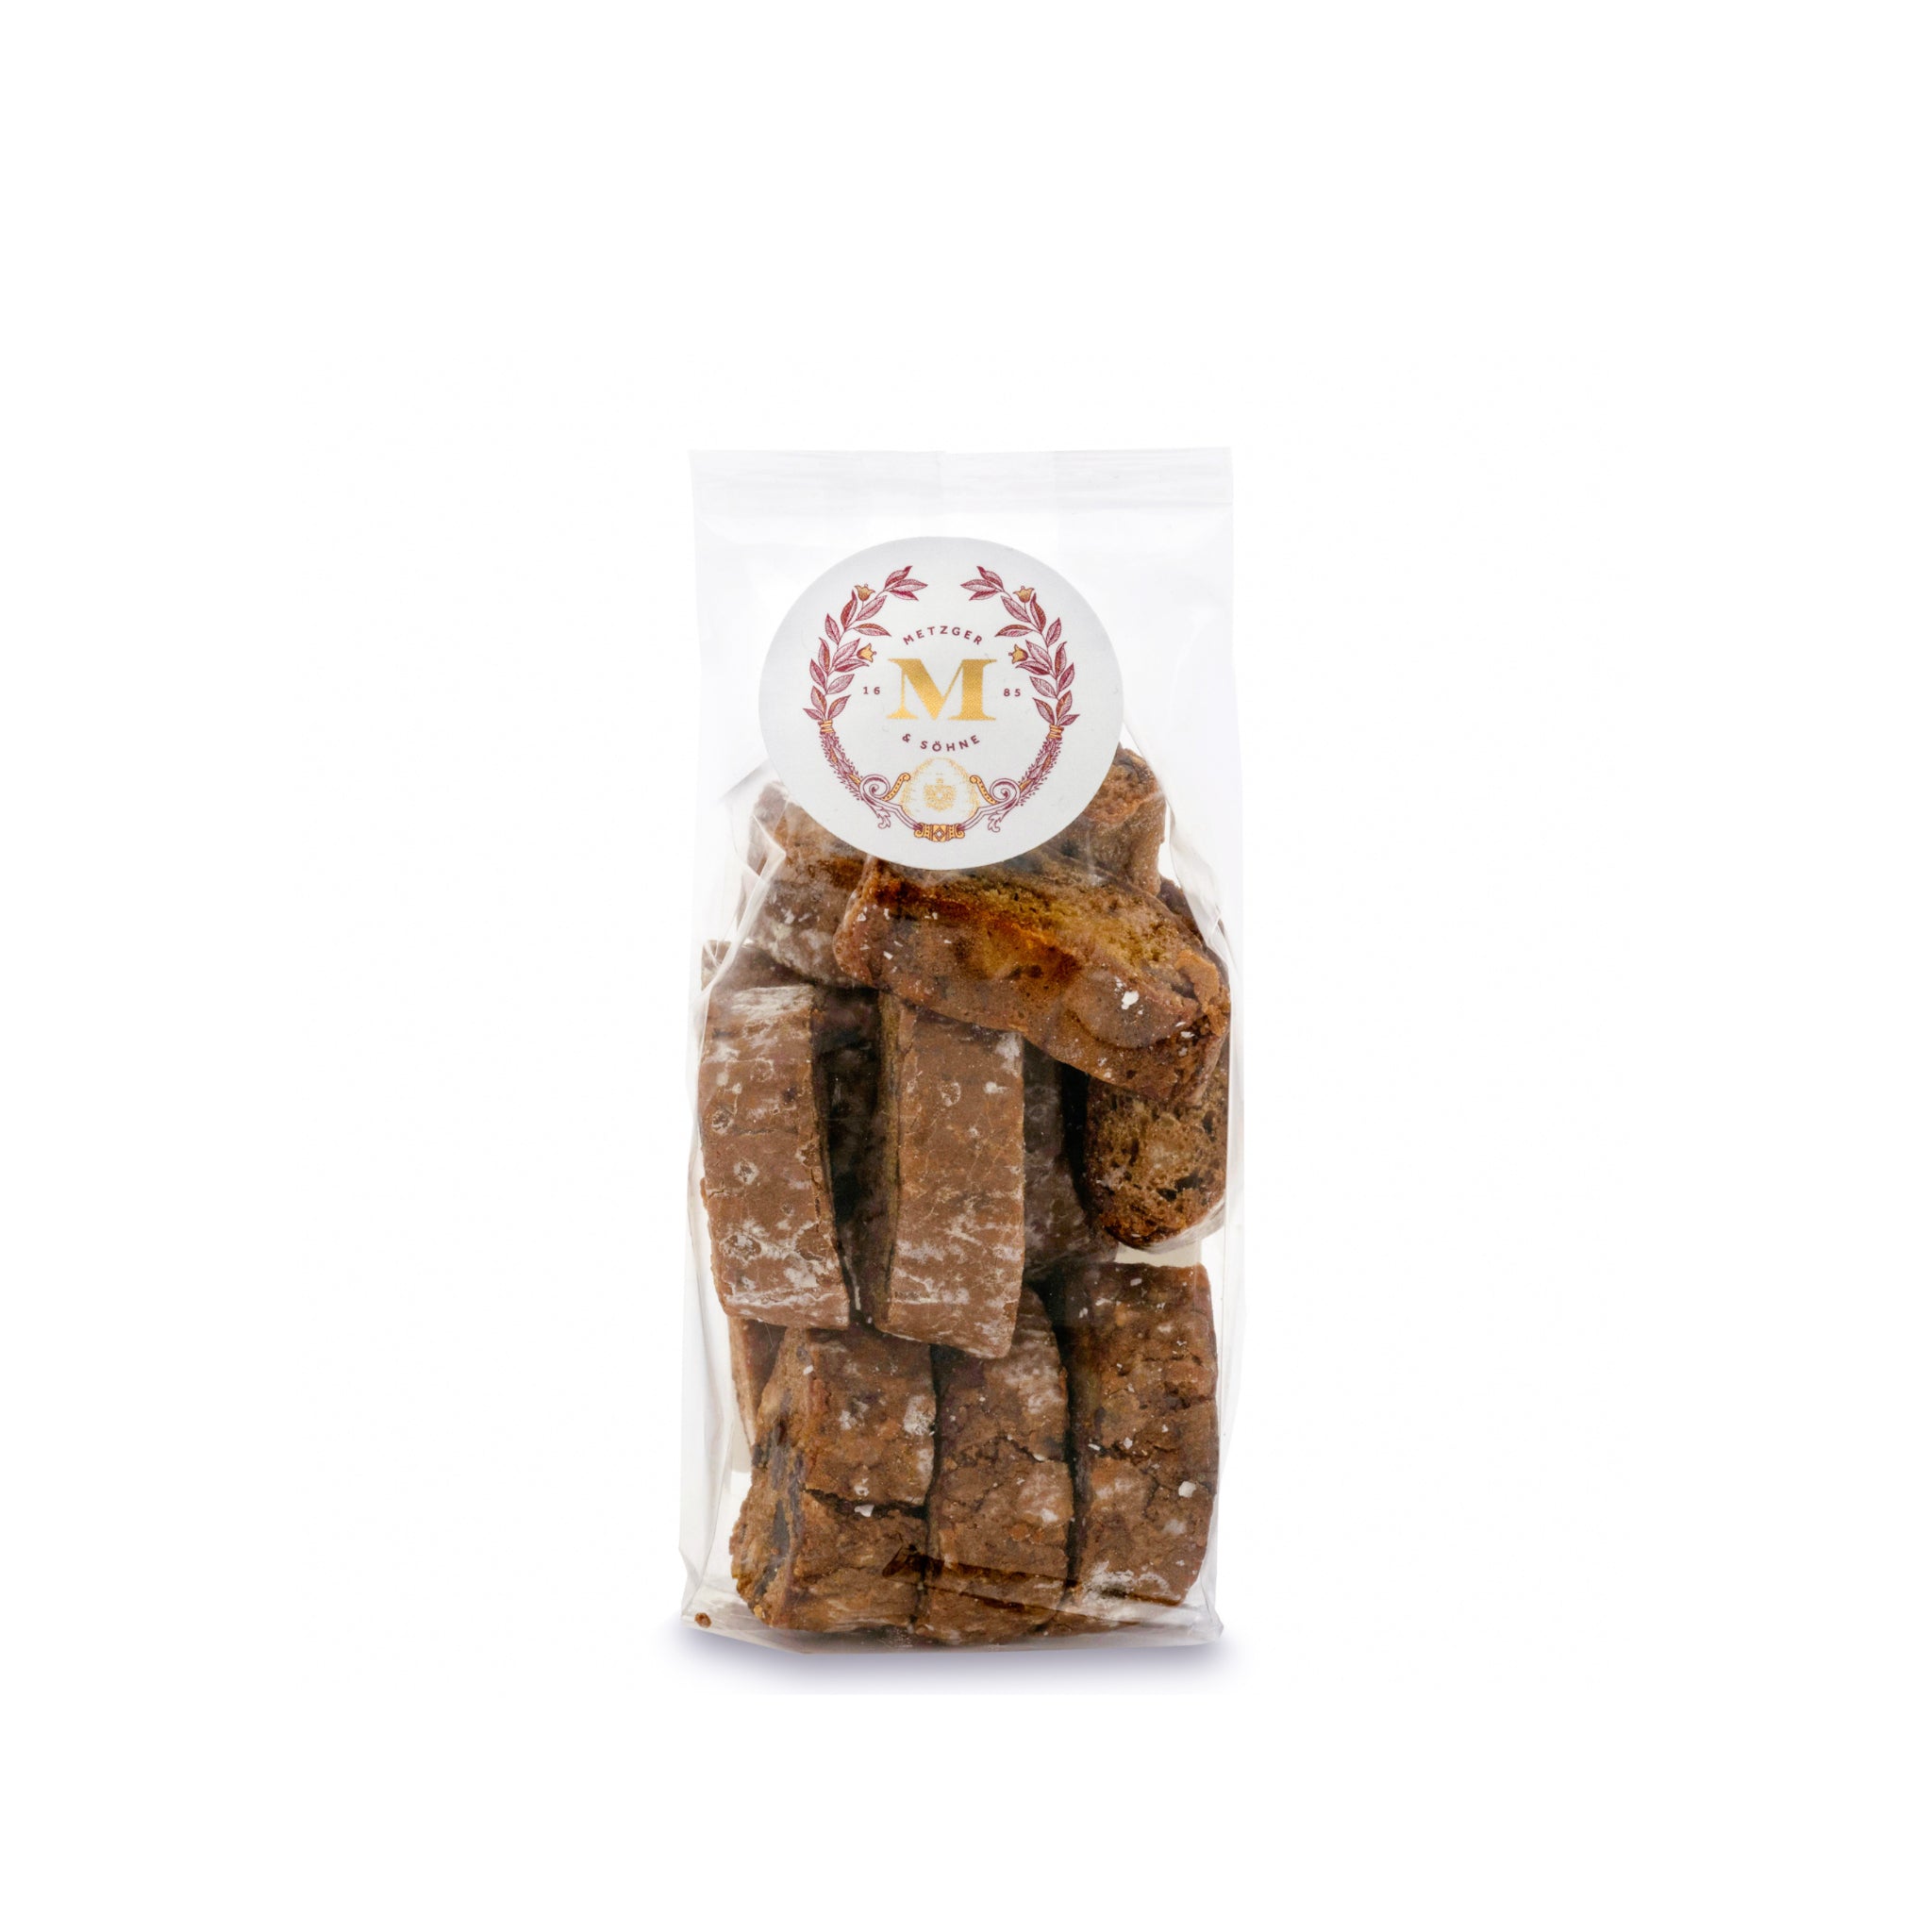 A Lebkuchen dream made of figs, dates, hazelnuts and matured Lebkuchen dough baked together in sticks, cut into bite-sized pieces.